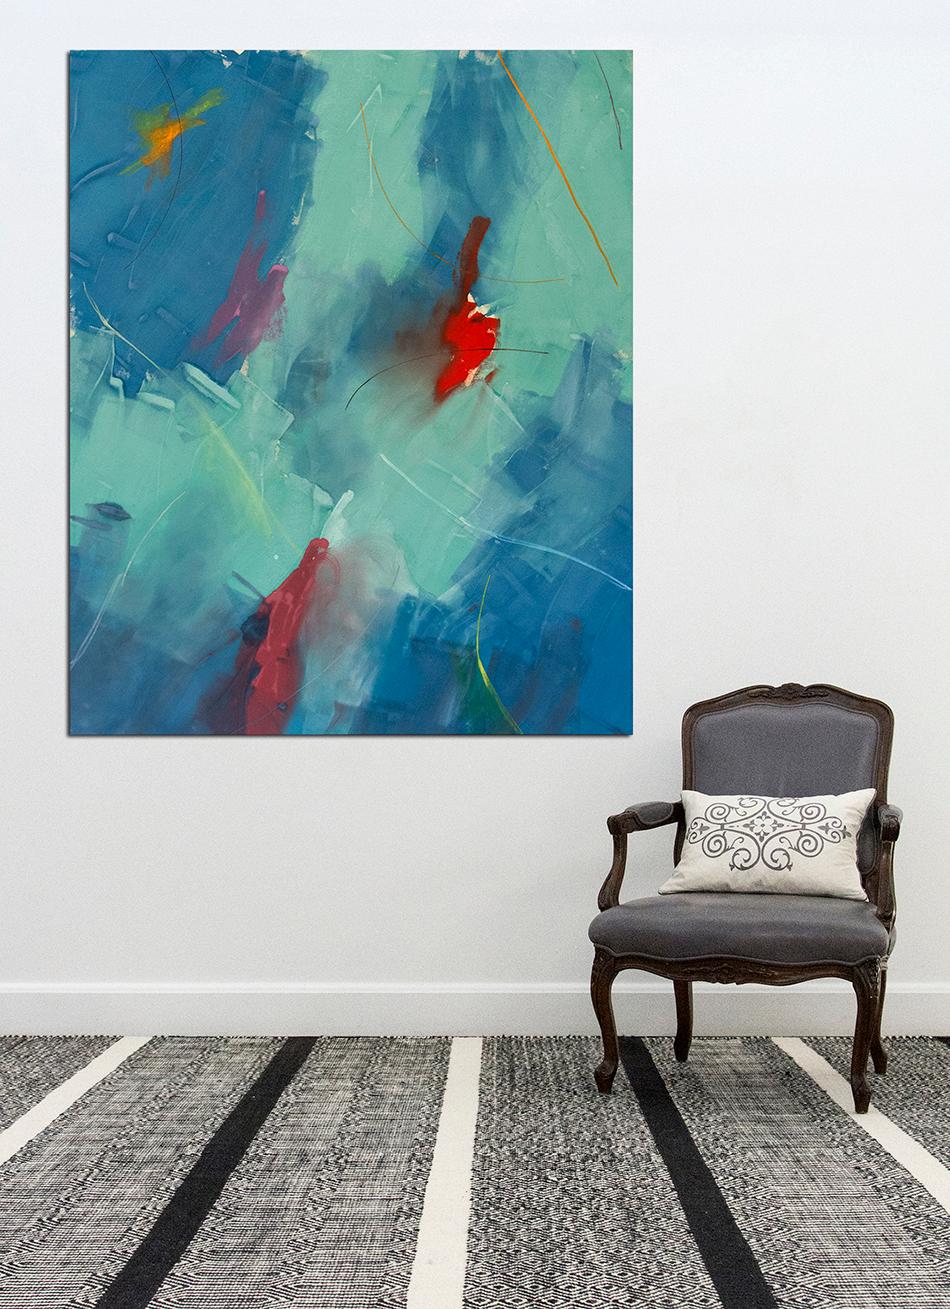 Free Place, Blue Green - large, bold, gestural abstract, acrylic on canvas 2